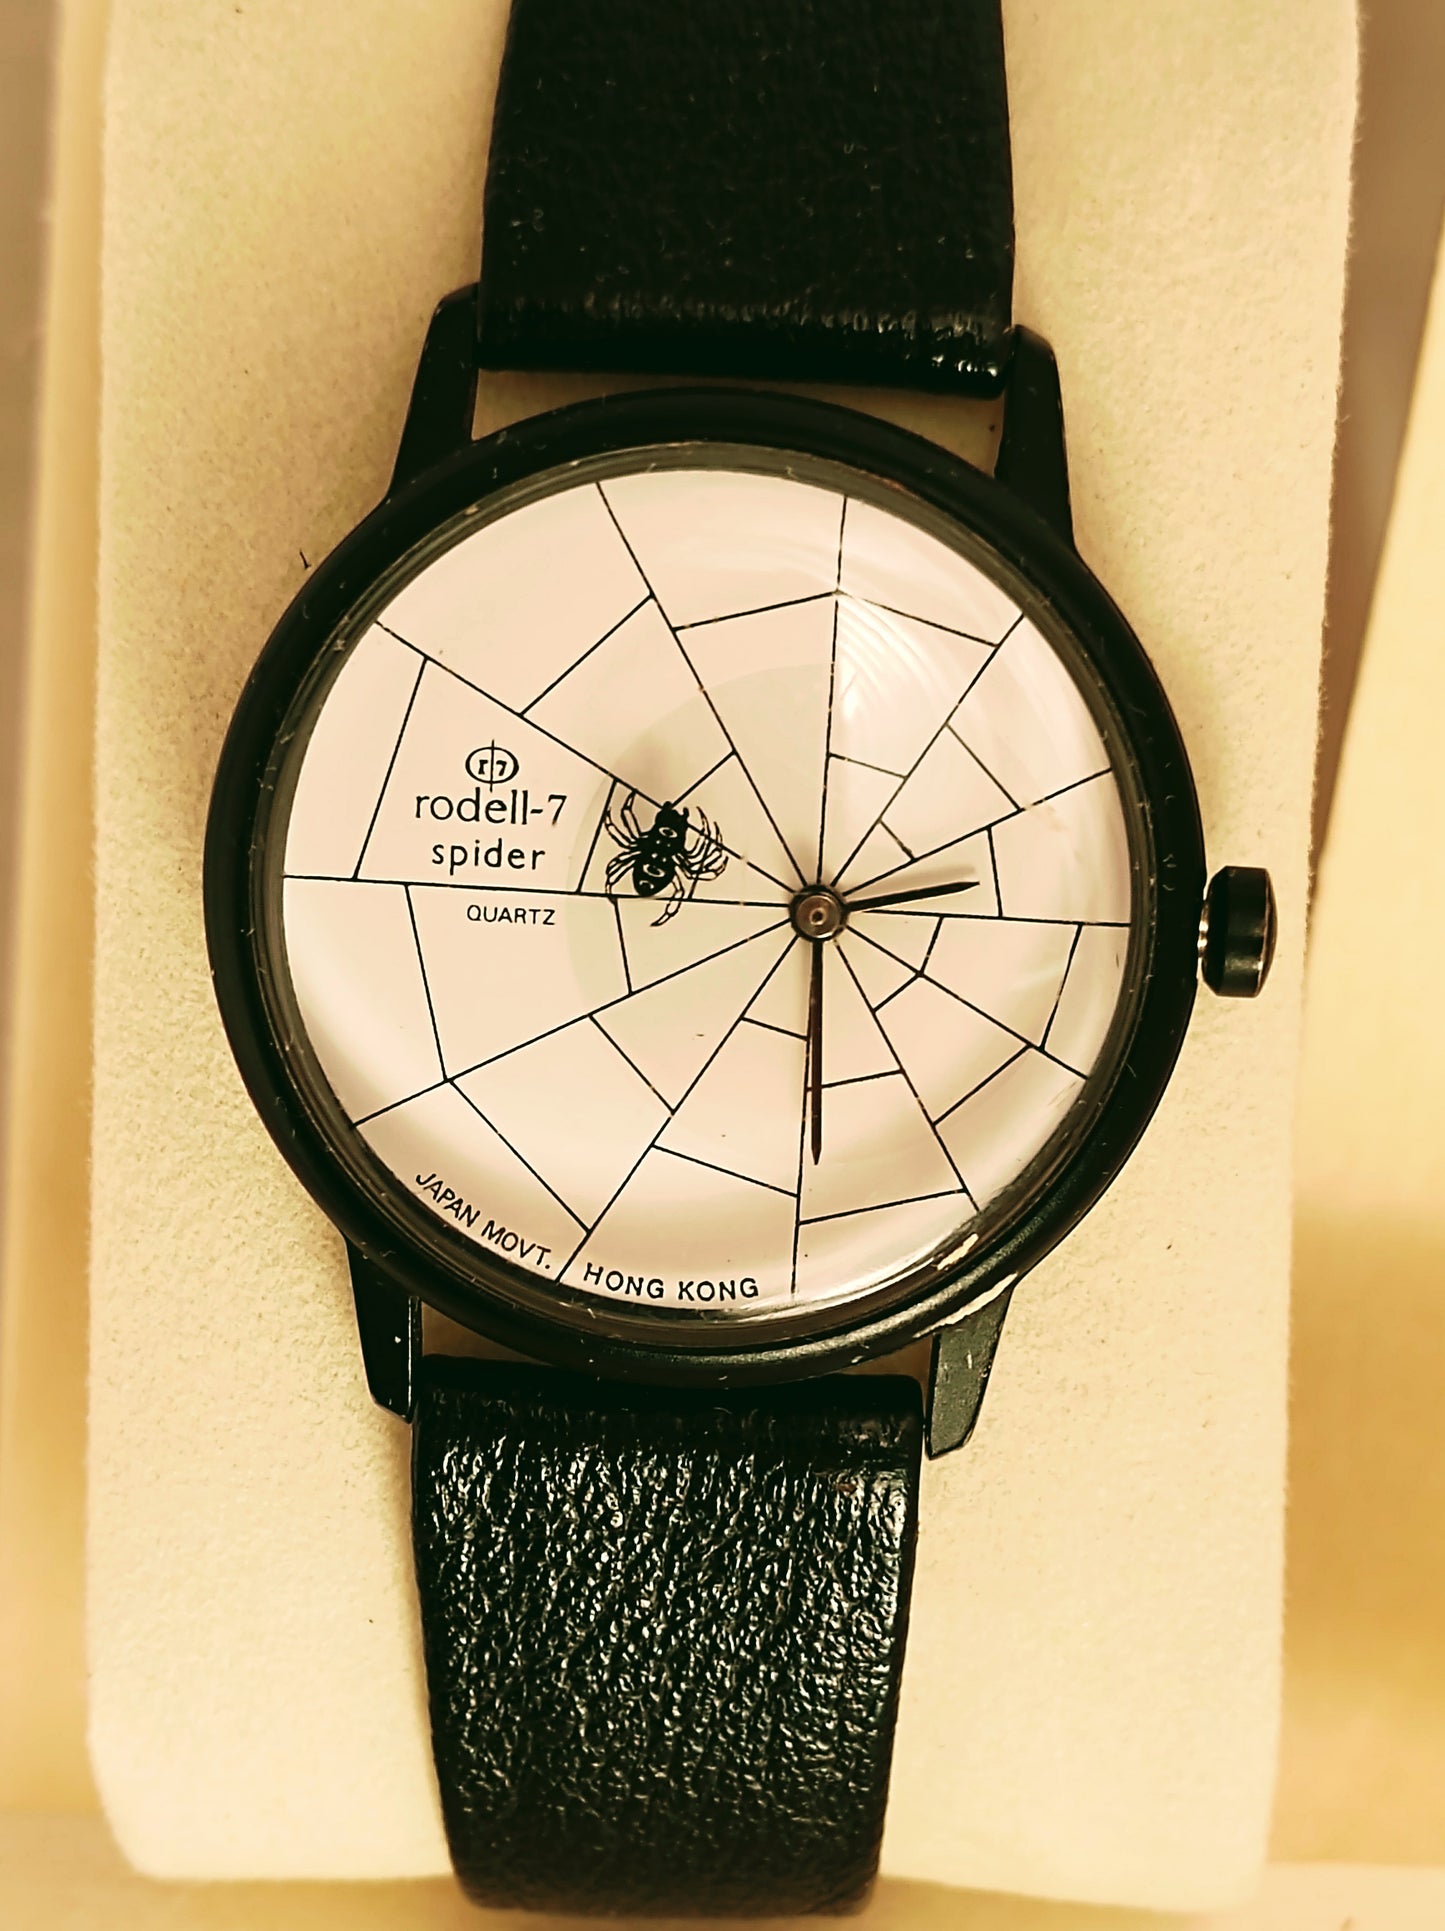 Rodell-7 spider watch...spider rotates with min hand. Black leather strap